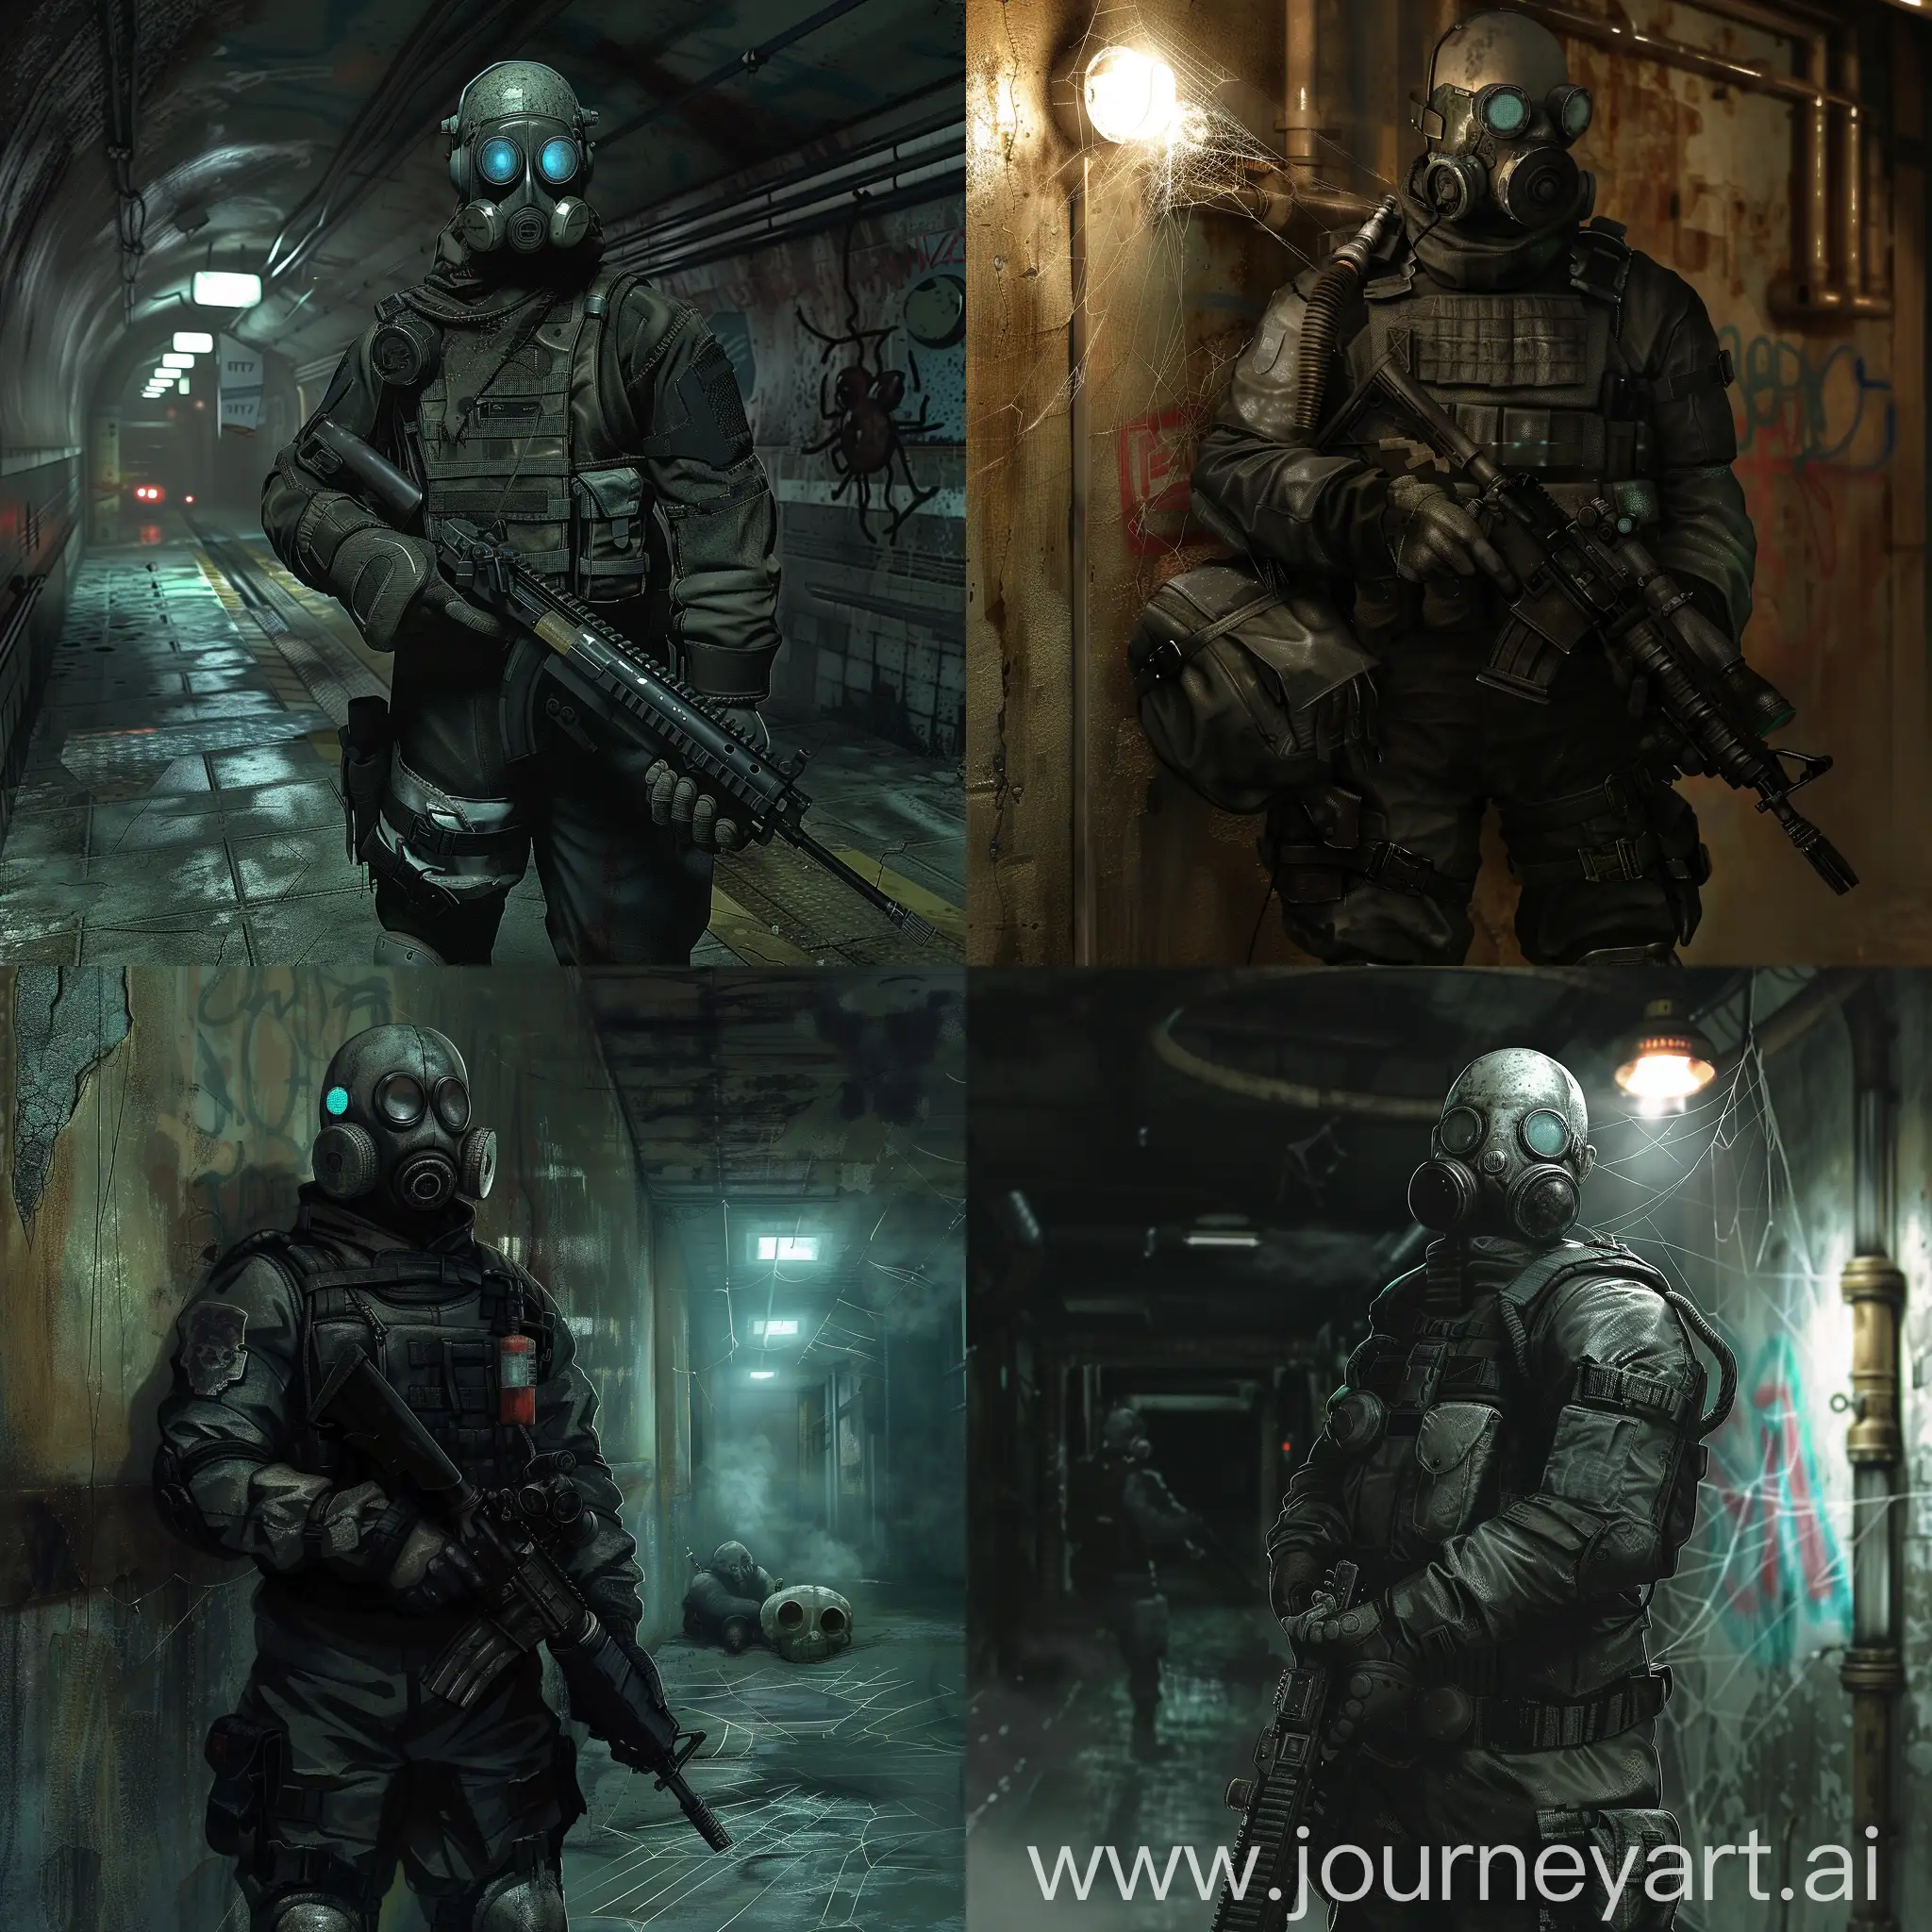 A stalker from the world of Metro 2033 in homemade chemical protection with a Kevlar bulletproof vest, in a gas mask, with a sniper rifle in his hands, stands in the middle of an abandoned station that is absolutely not illuminated by electricity since there is none, only a lamp that stands next to the stalker scantily illuminates everything around, and around the stalker there are cobwebs, cocoons of spiders and mutant spiders themselves the size of a dog, a stalker in a fighting position, the atmosphere is tense, frightening.